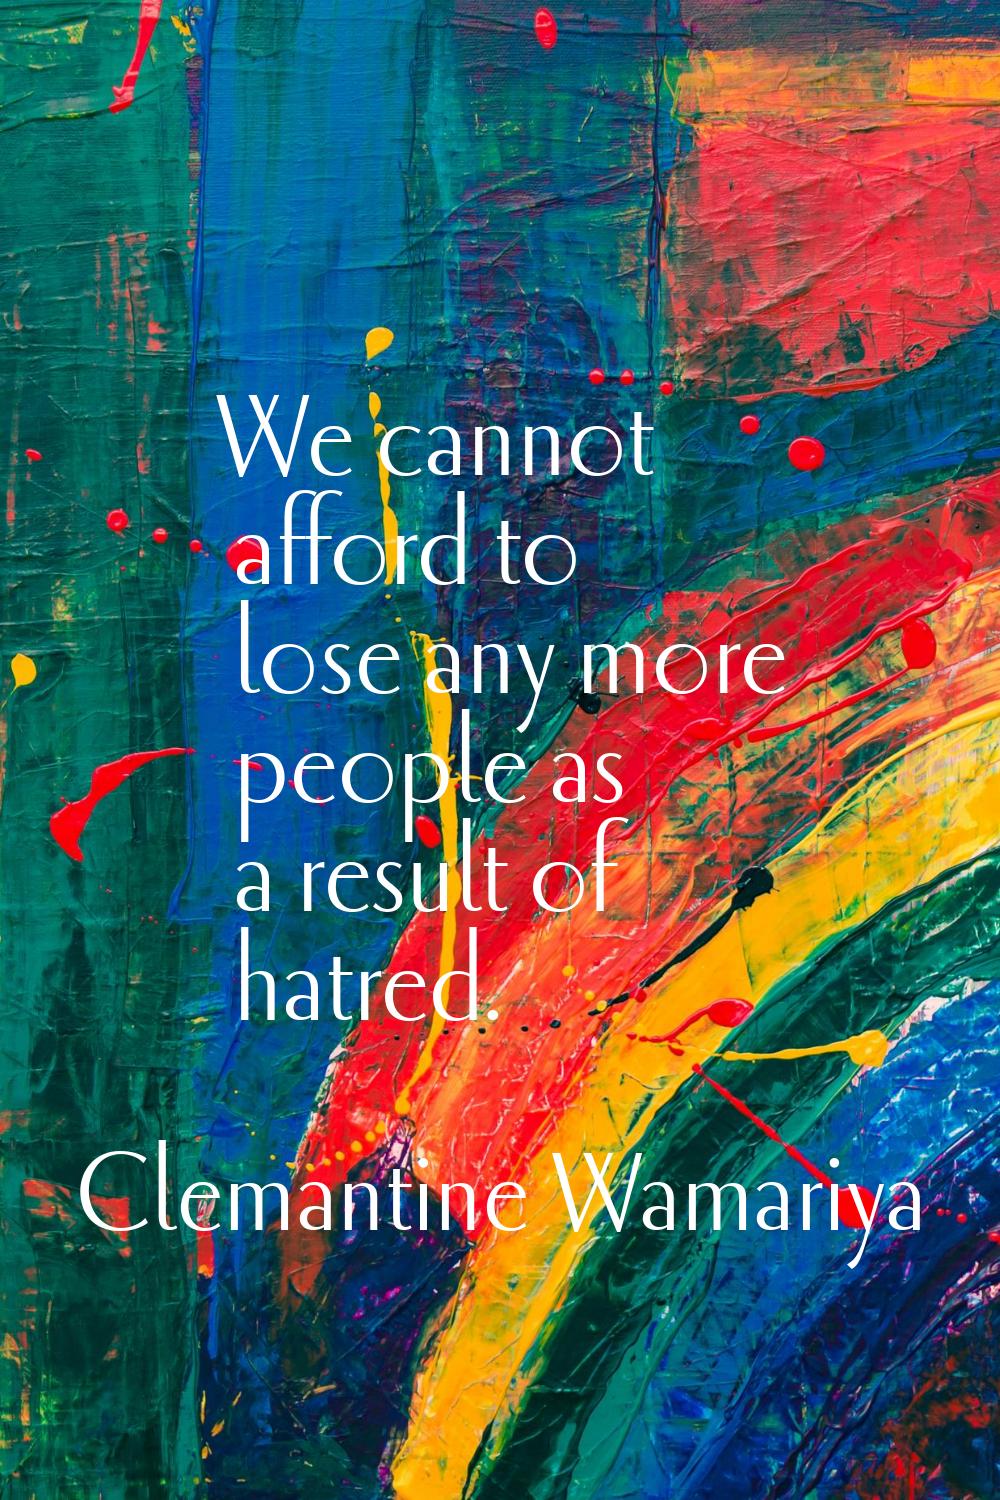 We cannot afford to lose any more people as a result of hatred.